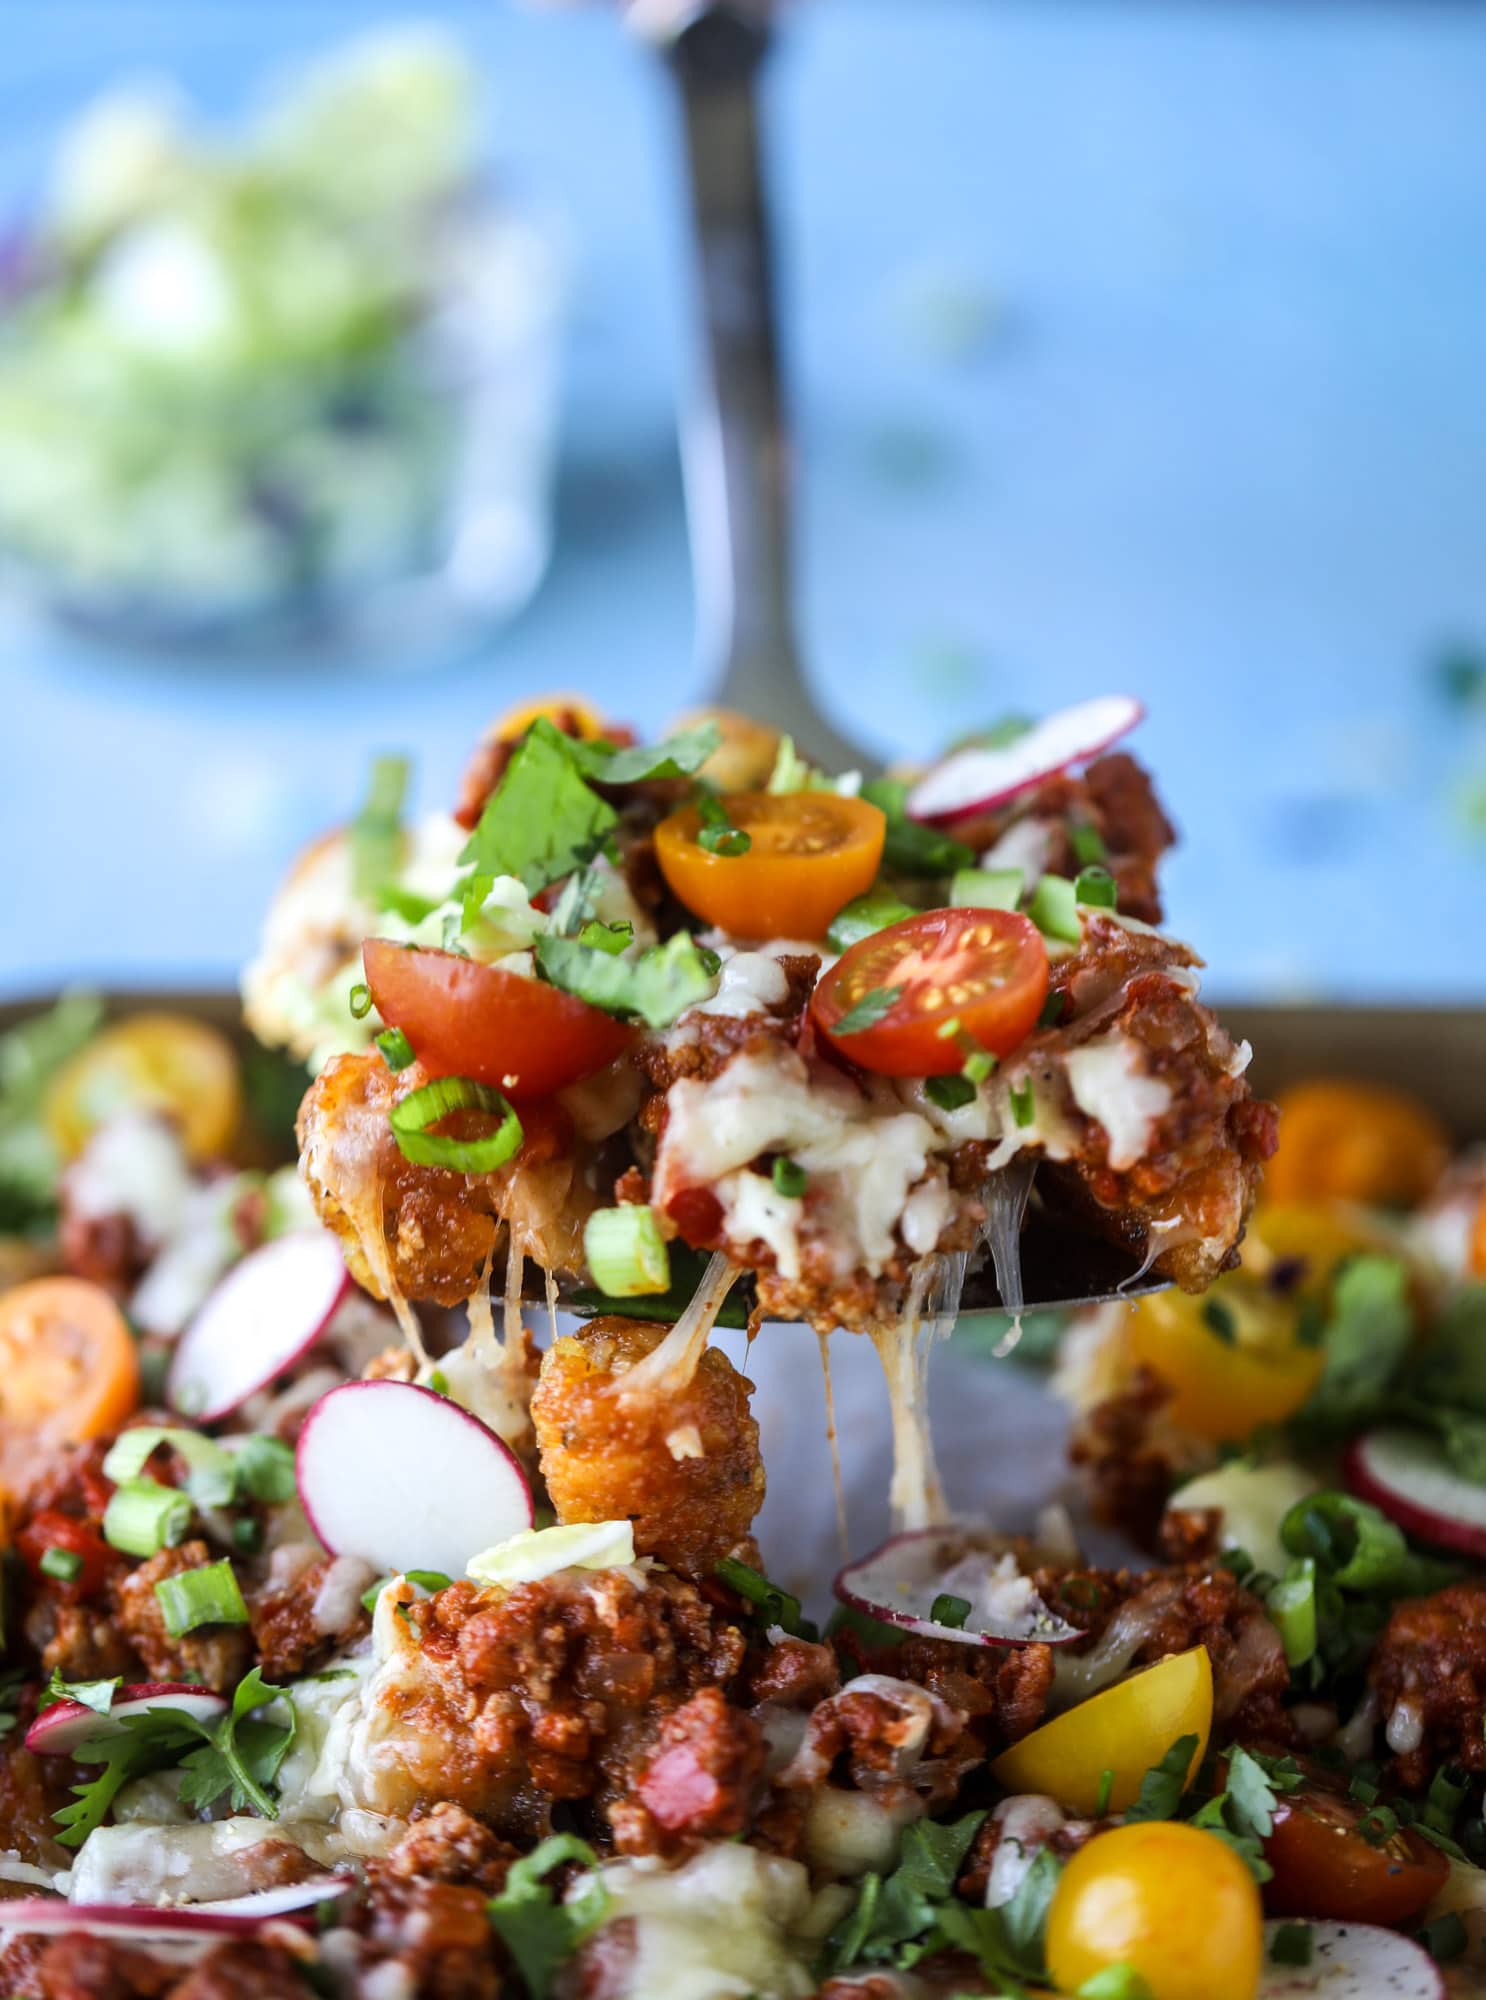 These tater tot nachos, otherwise known as totchos, are so delicious! They are cheesy and topped with a tangy, homemade sloppy joe mixture. Melted cheese, fresh tomatoes, scallions and chives come together for the best party food. I howsweeteats.com #totchos #tater #tot #nachos #sloppy #joes